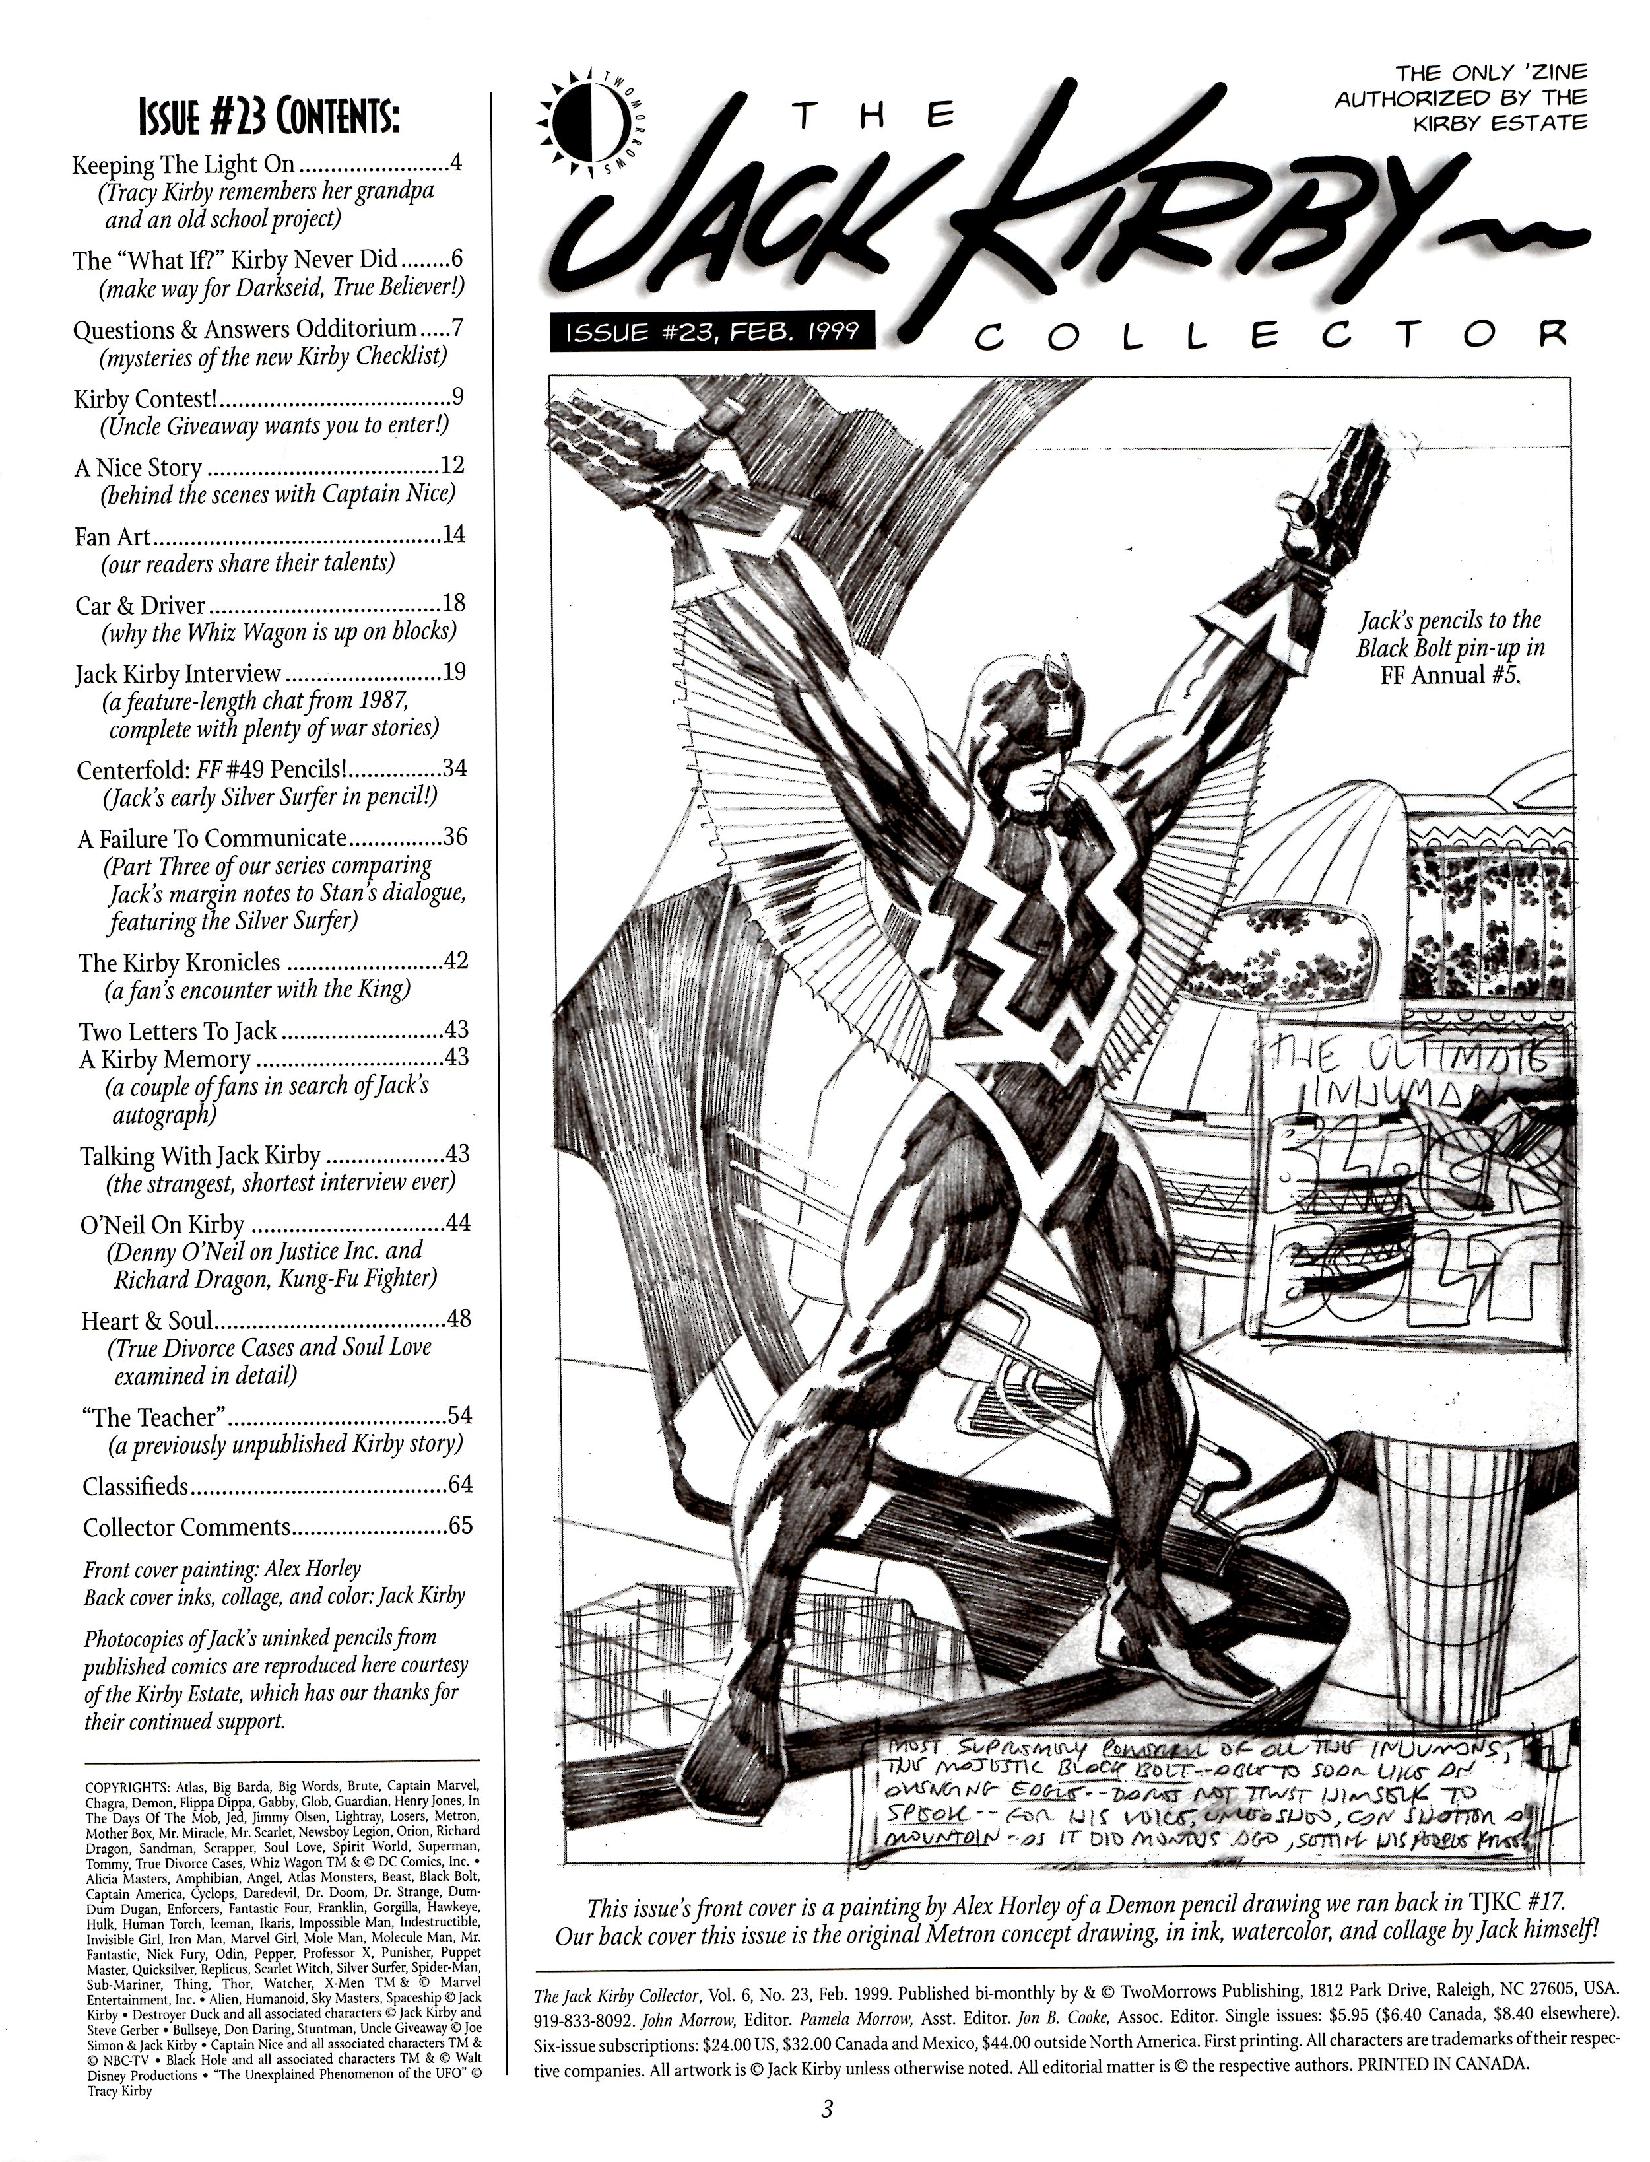 Read online The Jack Kirby Collector comic -  Issue #23 - 3